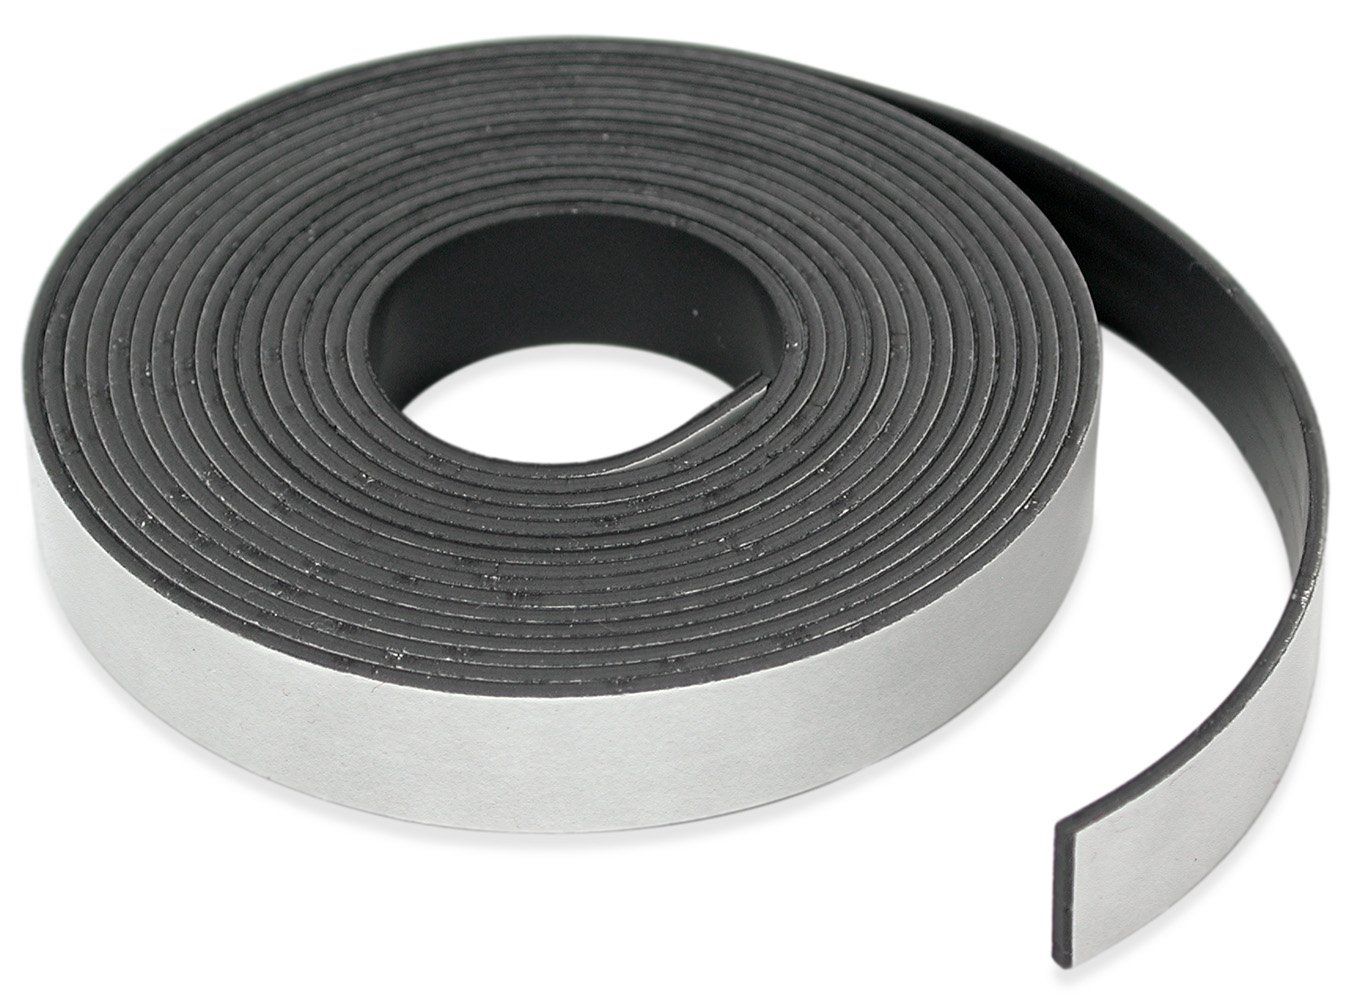 Master Magnetics - B005HYDC68 Roll-N-Cut Flexible Magnetic Tape Refill - 1/16" Thick x 1/2" Wide x 1 | Amazon (US)